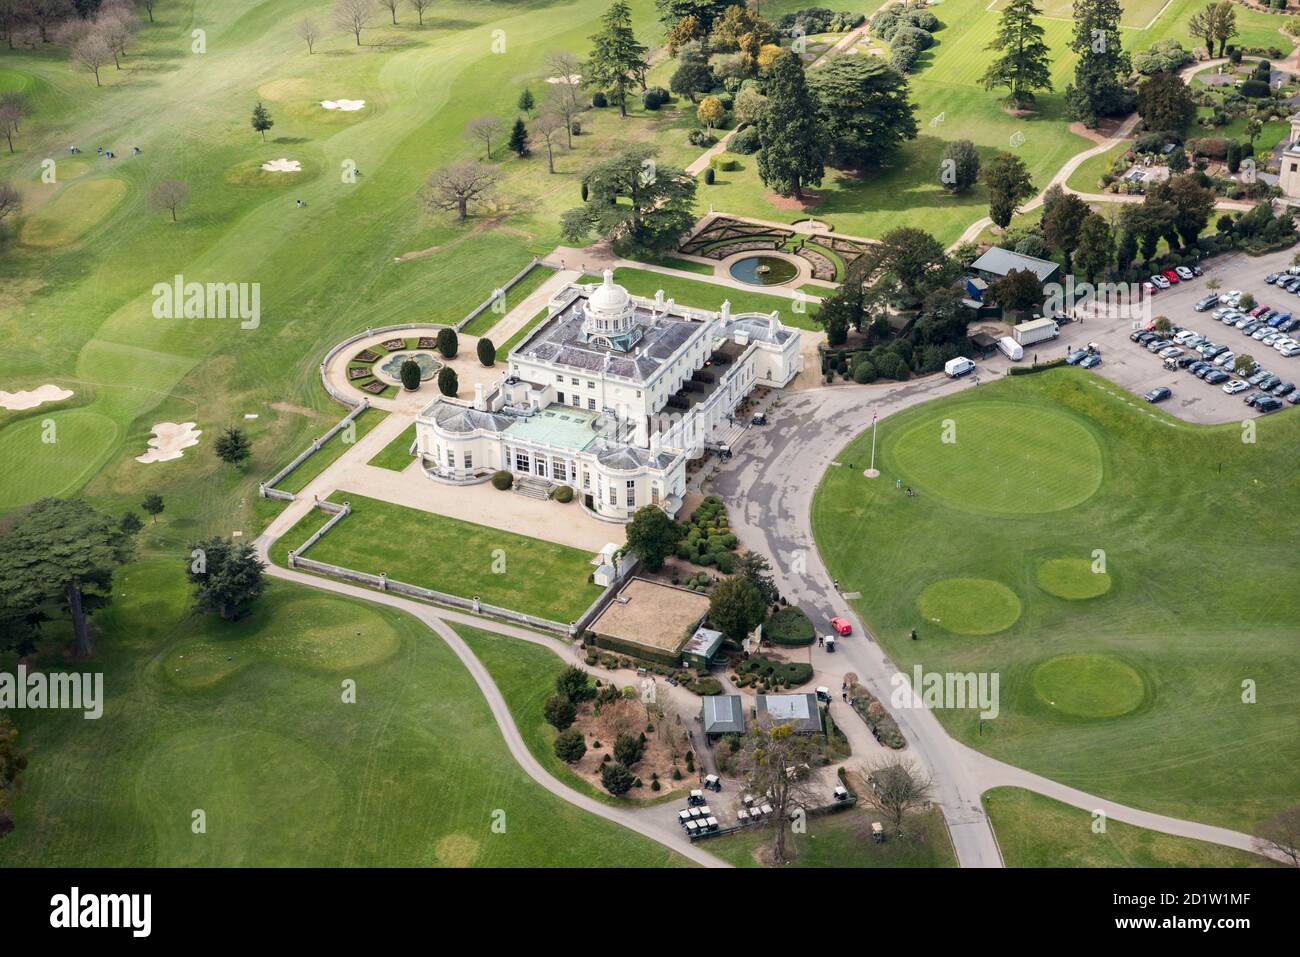 Stoke Park House and landscape park now incorporated into a golf course which forms part of a luxury hotel, spa and country club, Stoke Park, Buckinghamshire, UK. Aerial view. Stock Photo